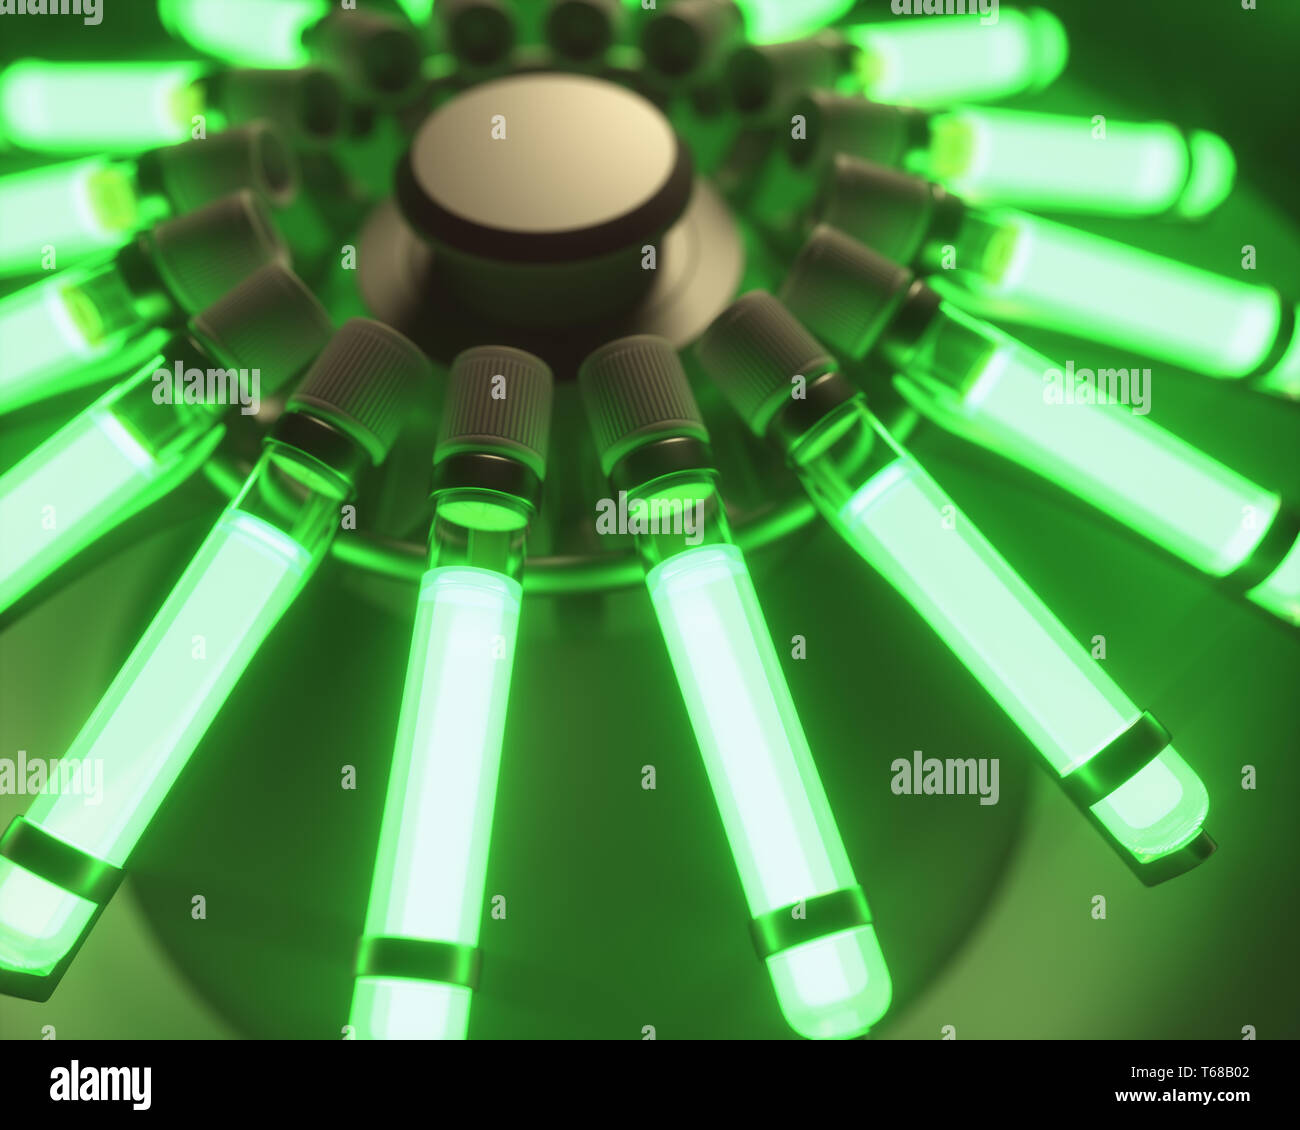 Centrifugal machine with several test tubes with chemical luminescent material. 3D illustration. Stock Photo